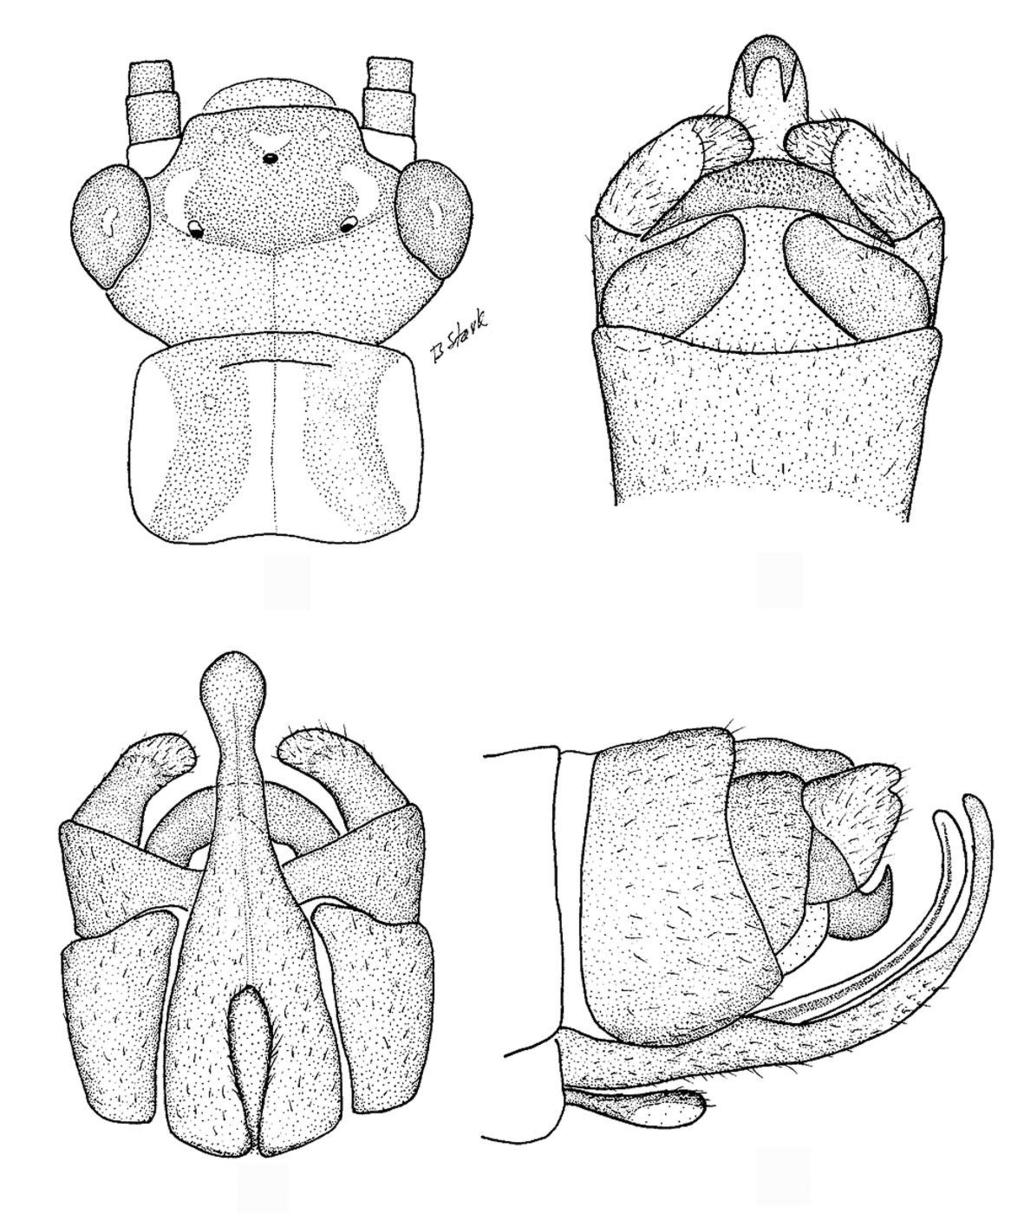 1 2 3 4 Figs. 1-4. Neonemura copa. 1. Head and pronotum. 2. Male terminalia, dorsal. 3. Male terminalia, ventral. 4. Male terminalia, lateral. Larva. Unknown. Etymology.